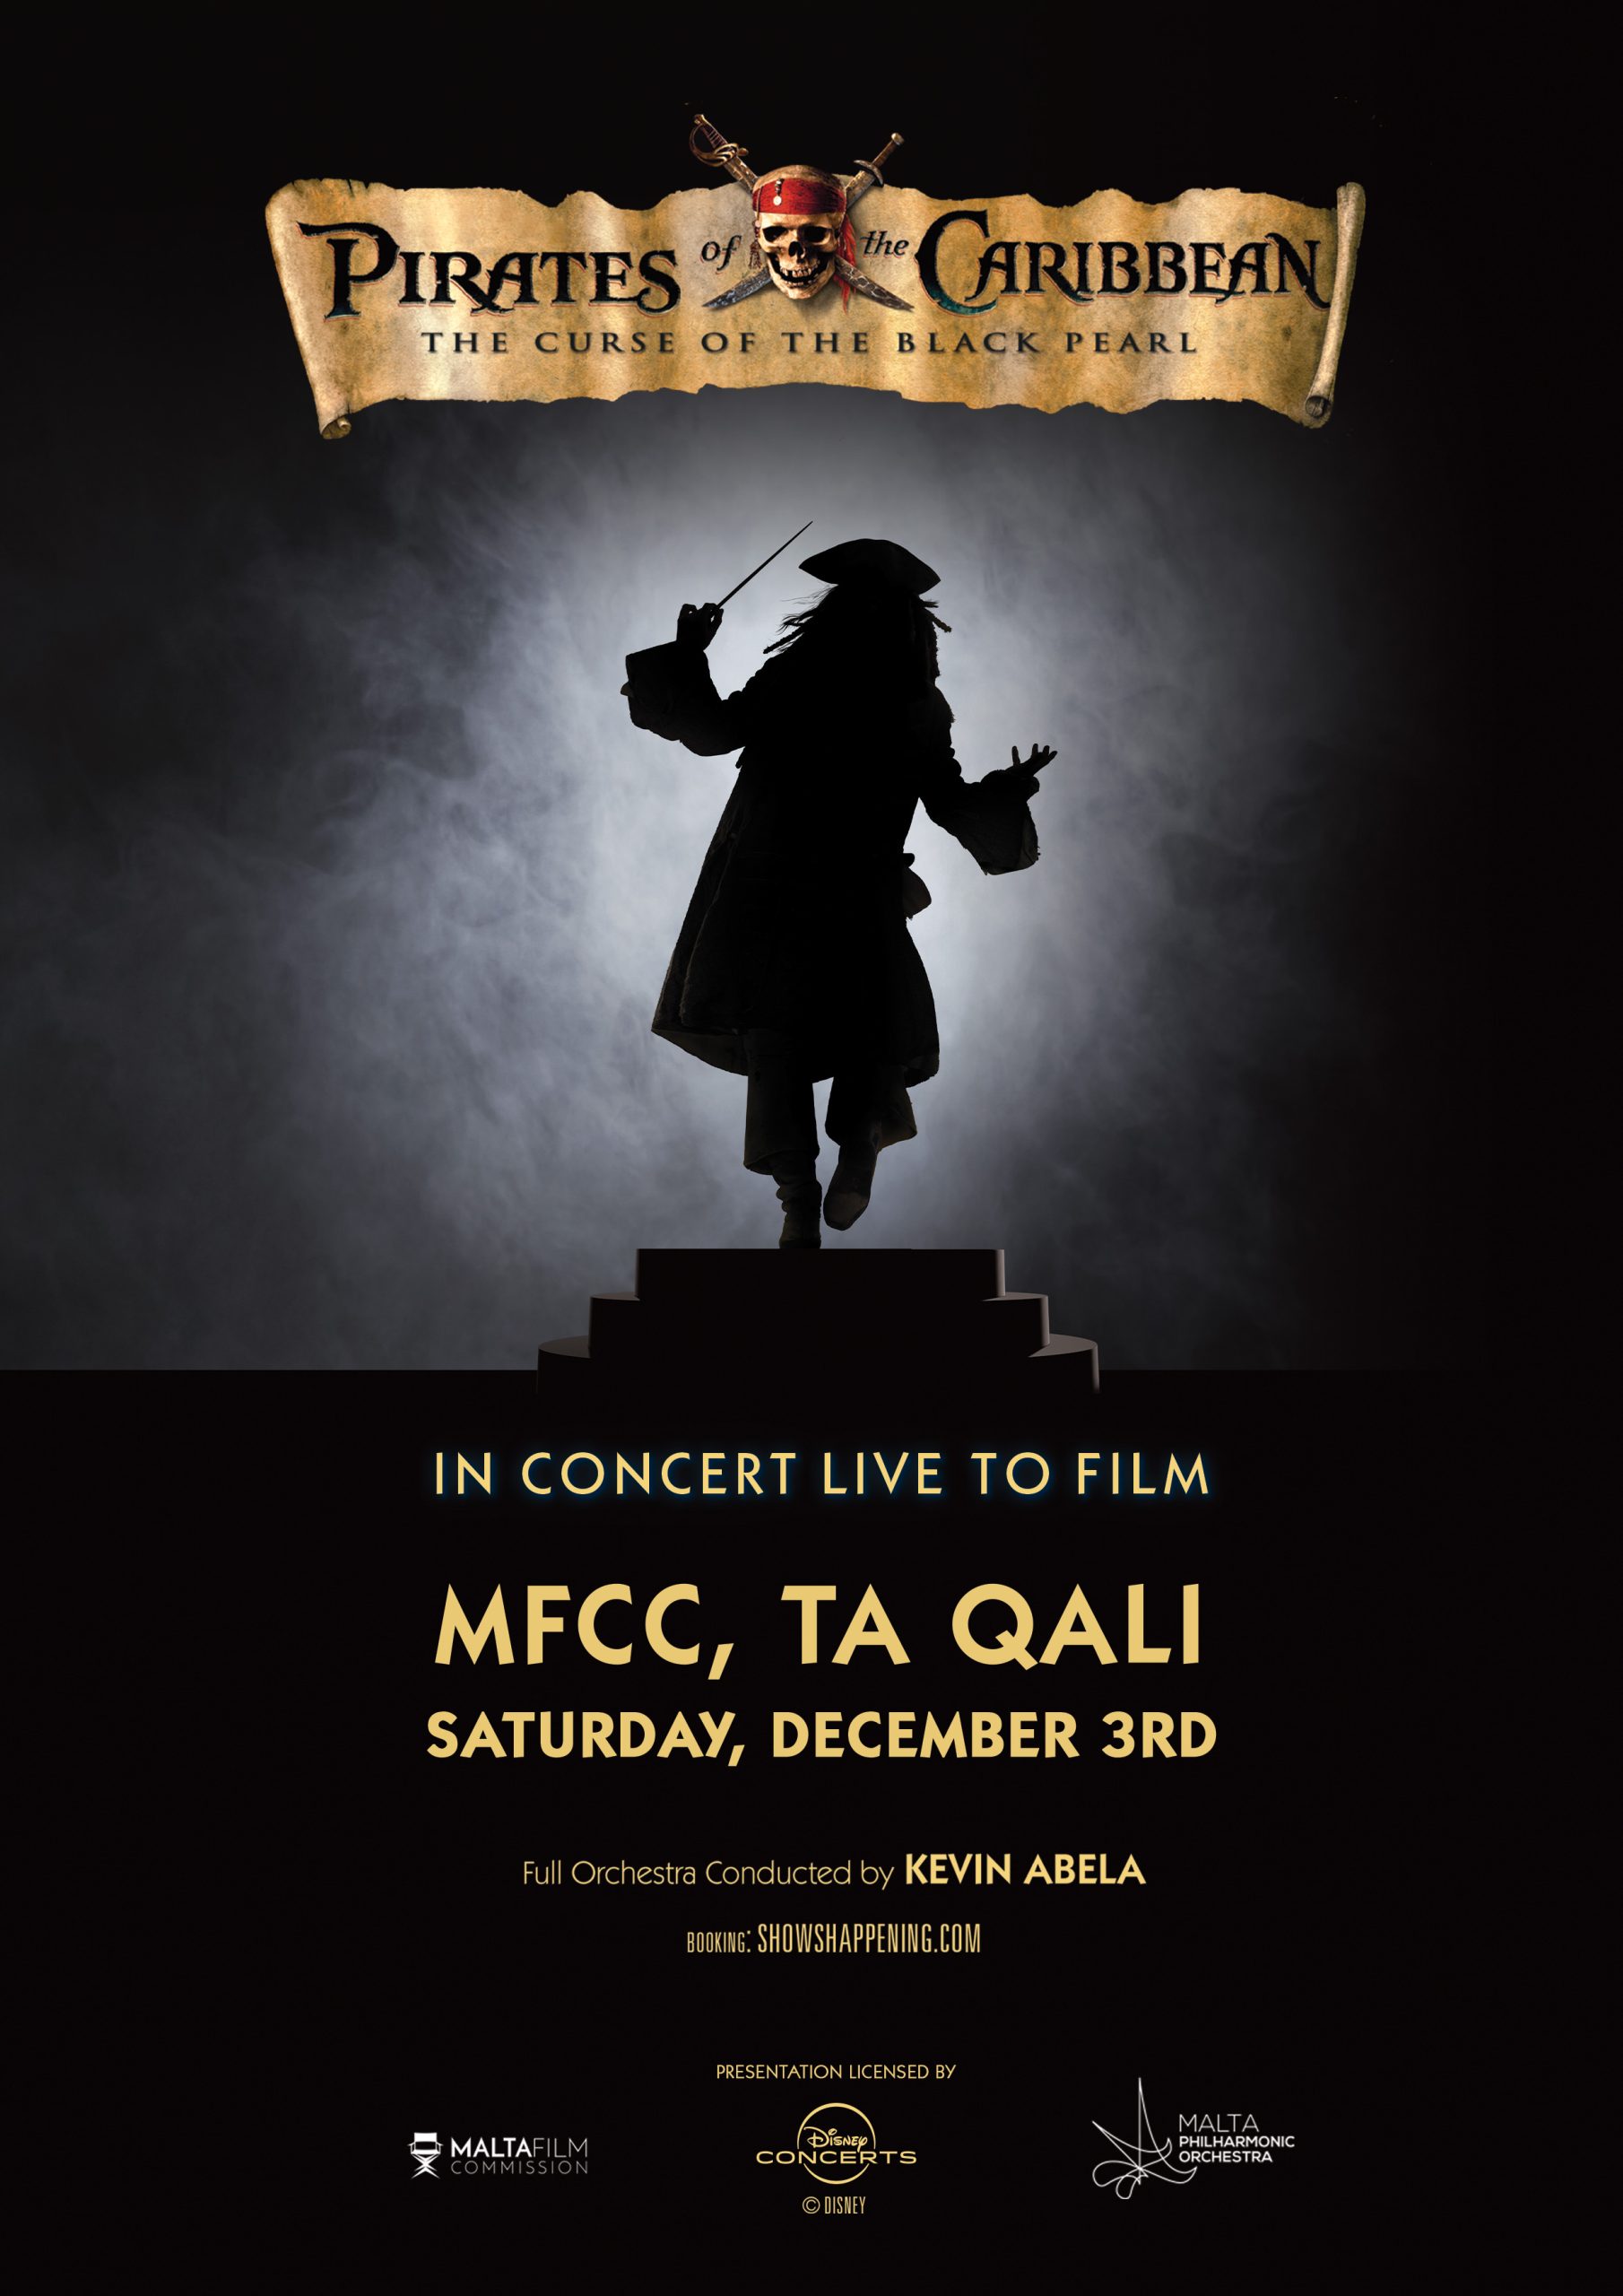 hans zimmer pirates of the caribbean will be performed in Malta by the MPO